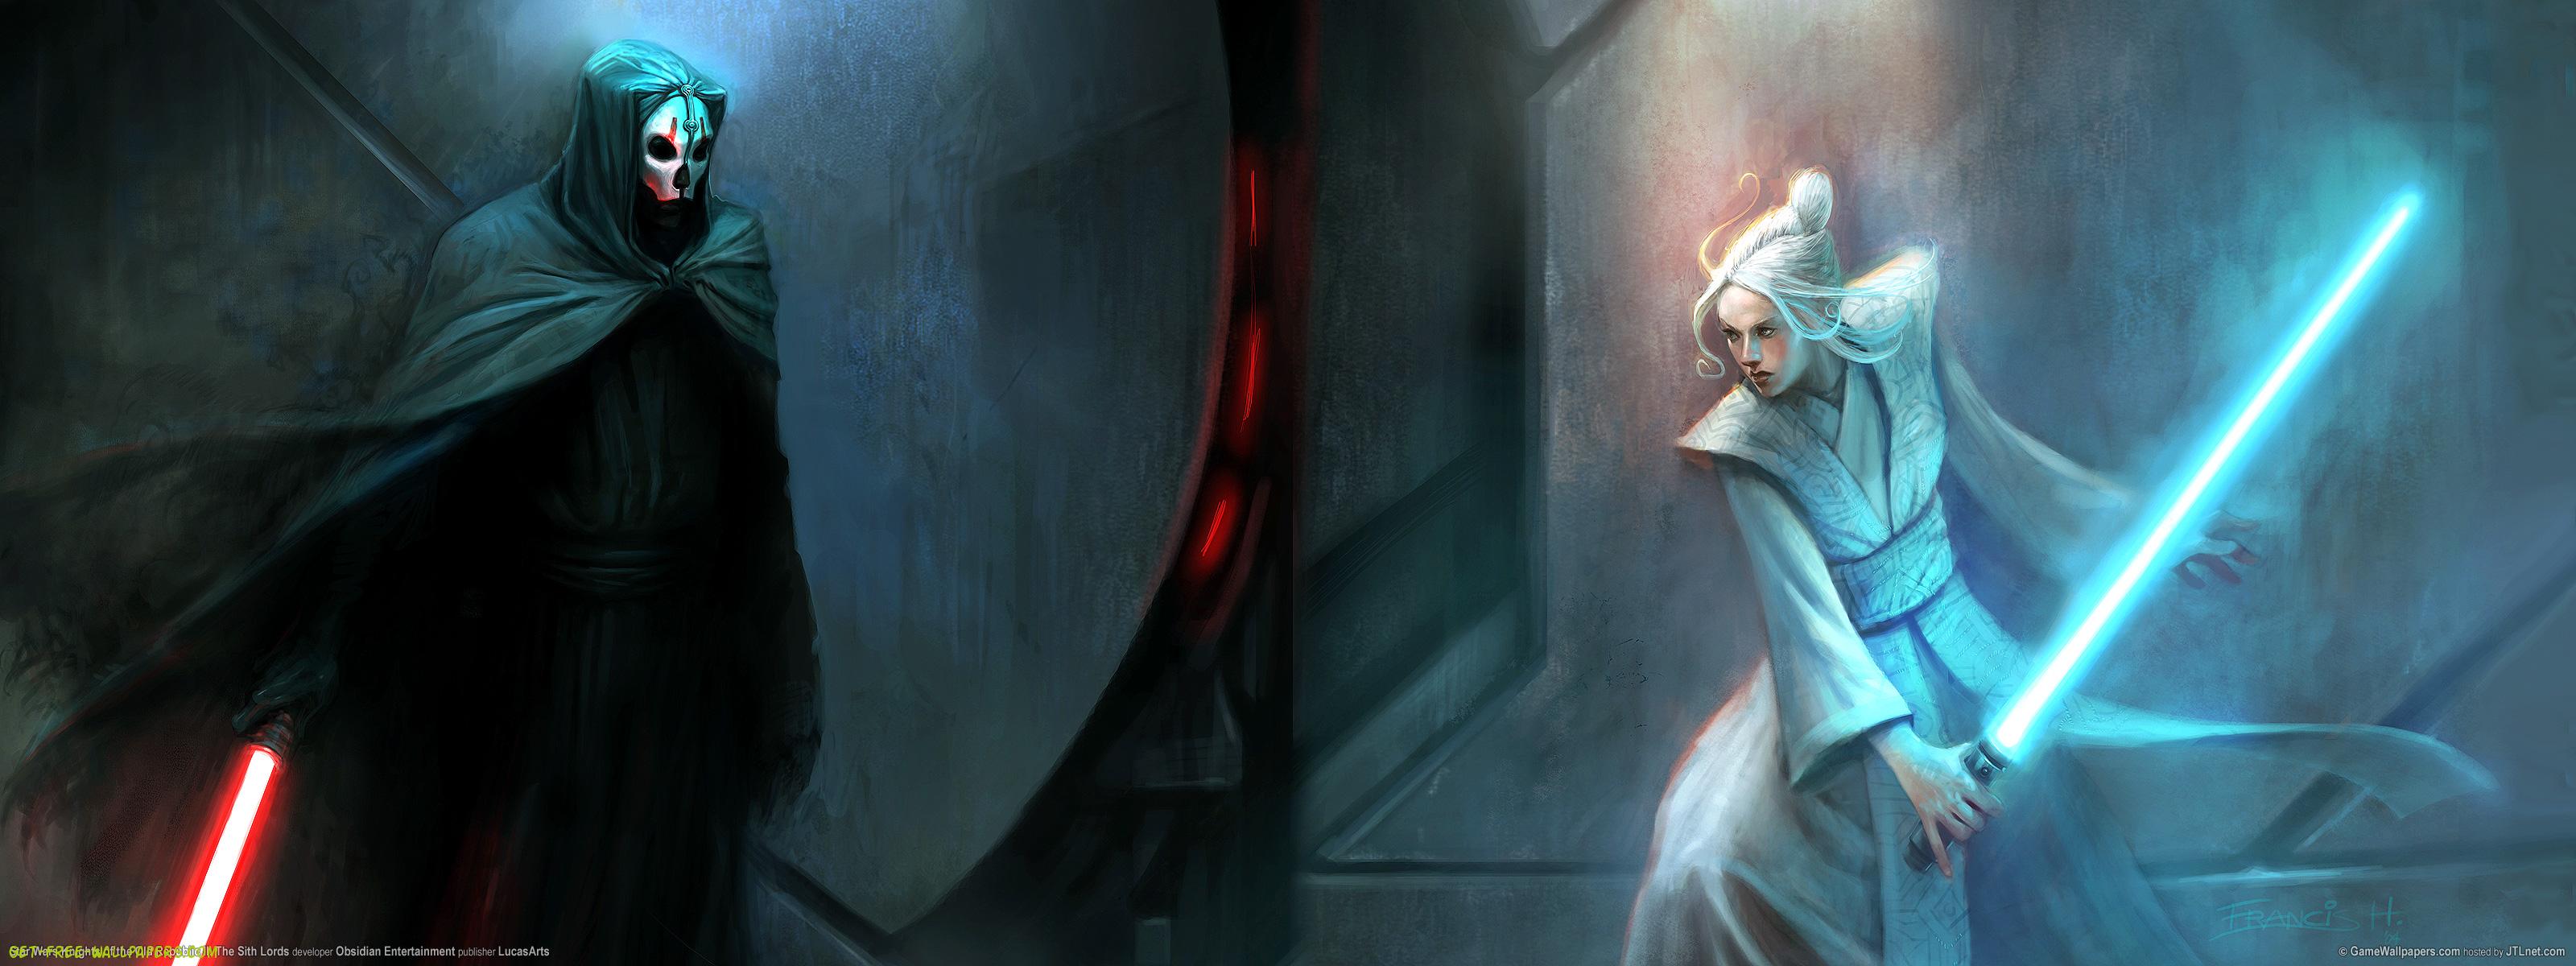 The Background Image From Kotor Ii Is Get Wallpaper